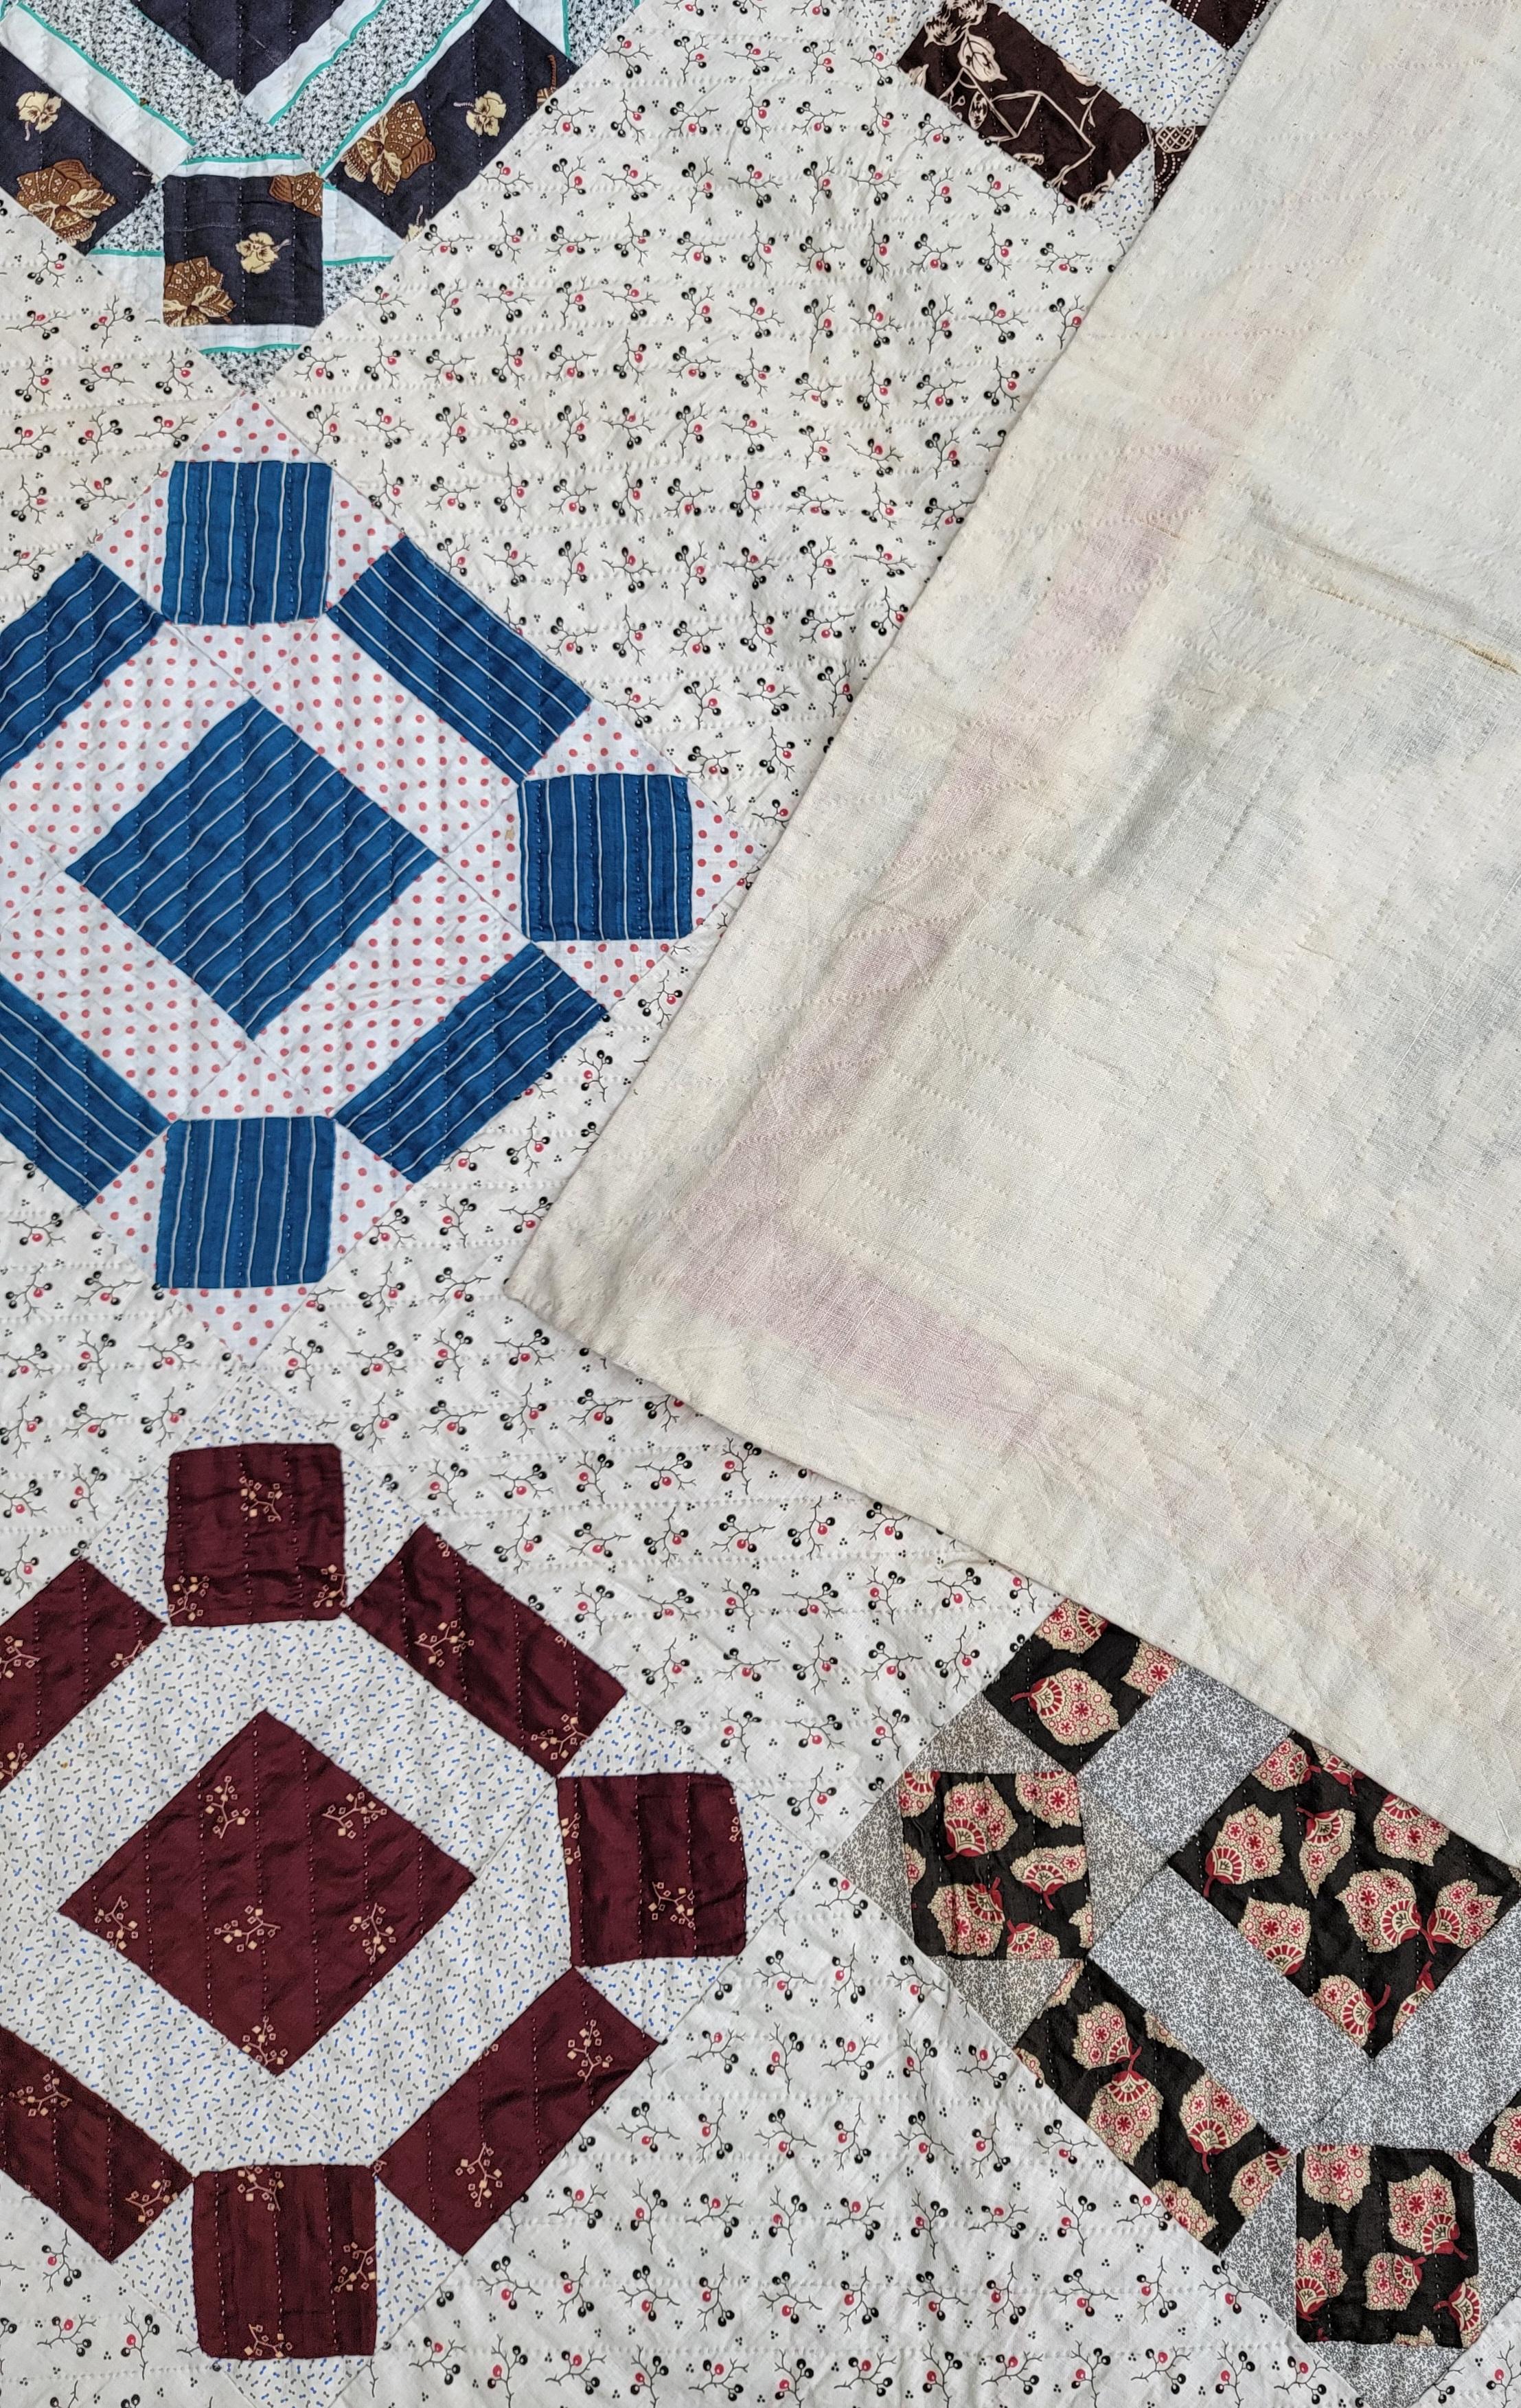 Hand-Crafted 19Thc Geometric Blocks & Fantastic Early Fabrics Quilt For Sale